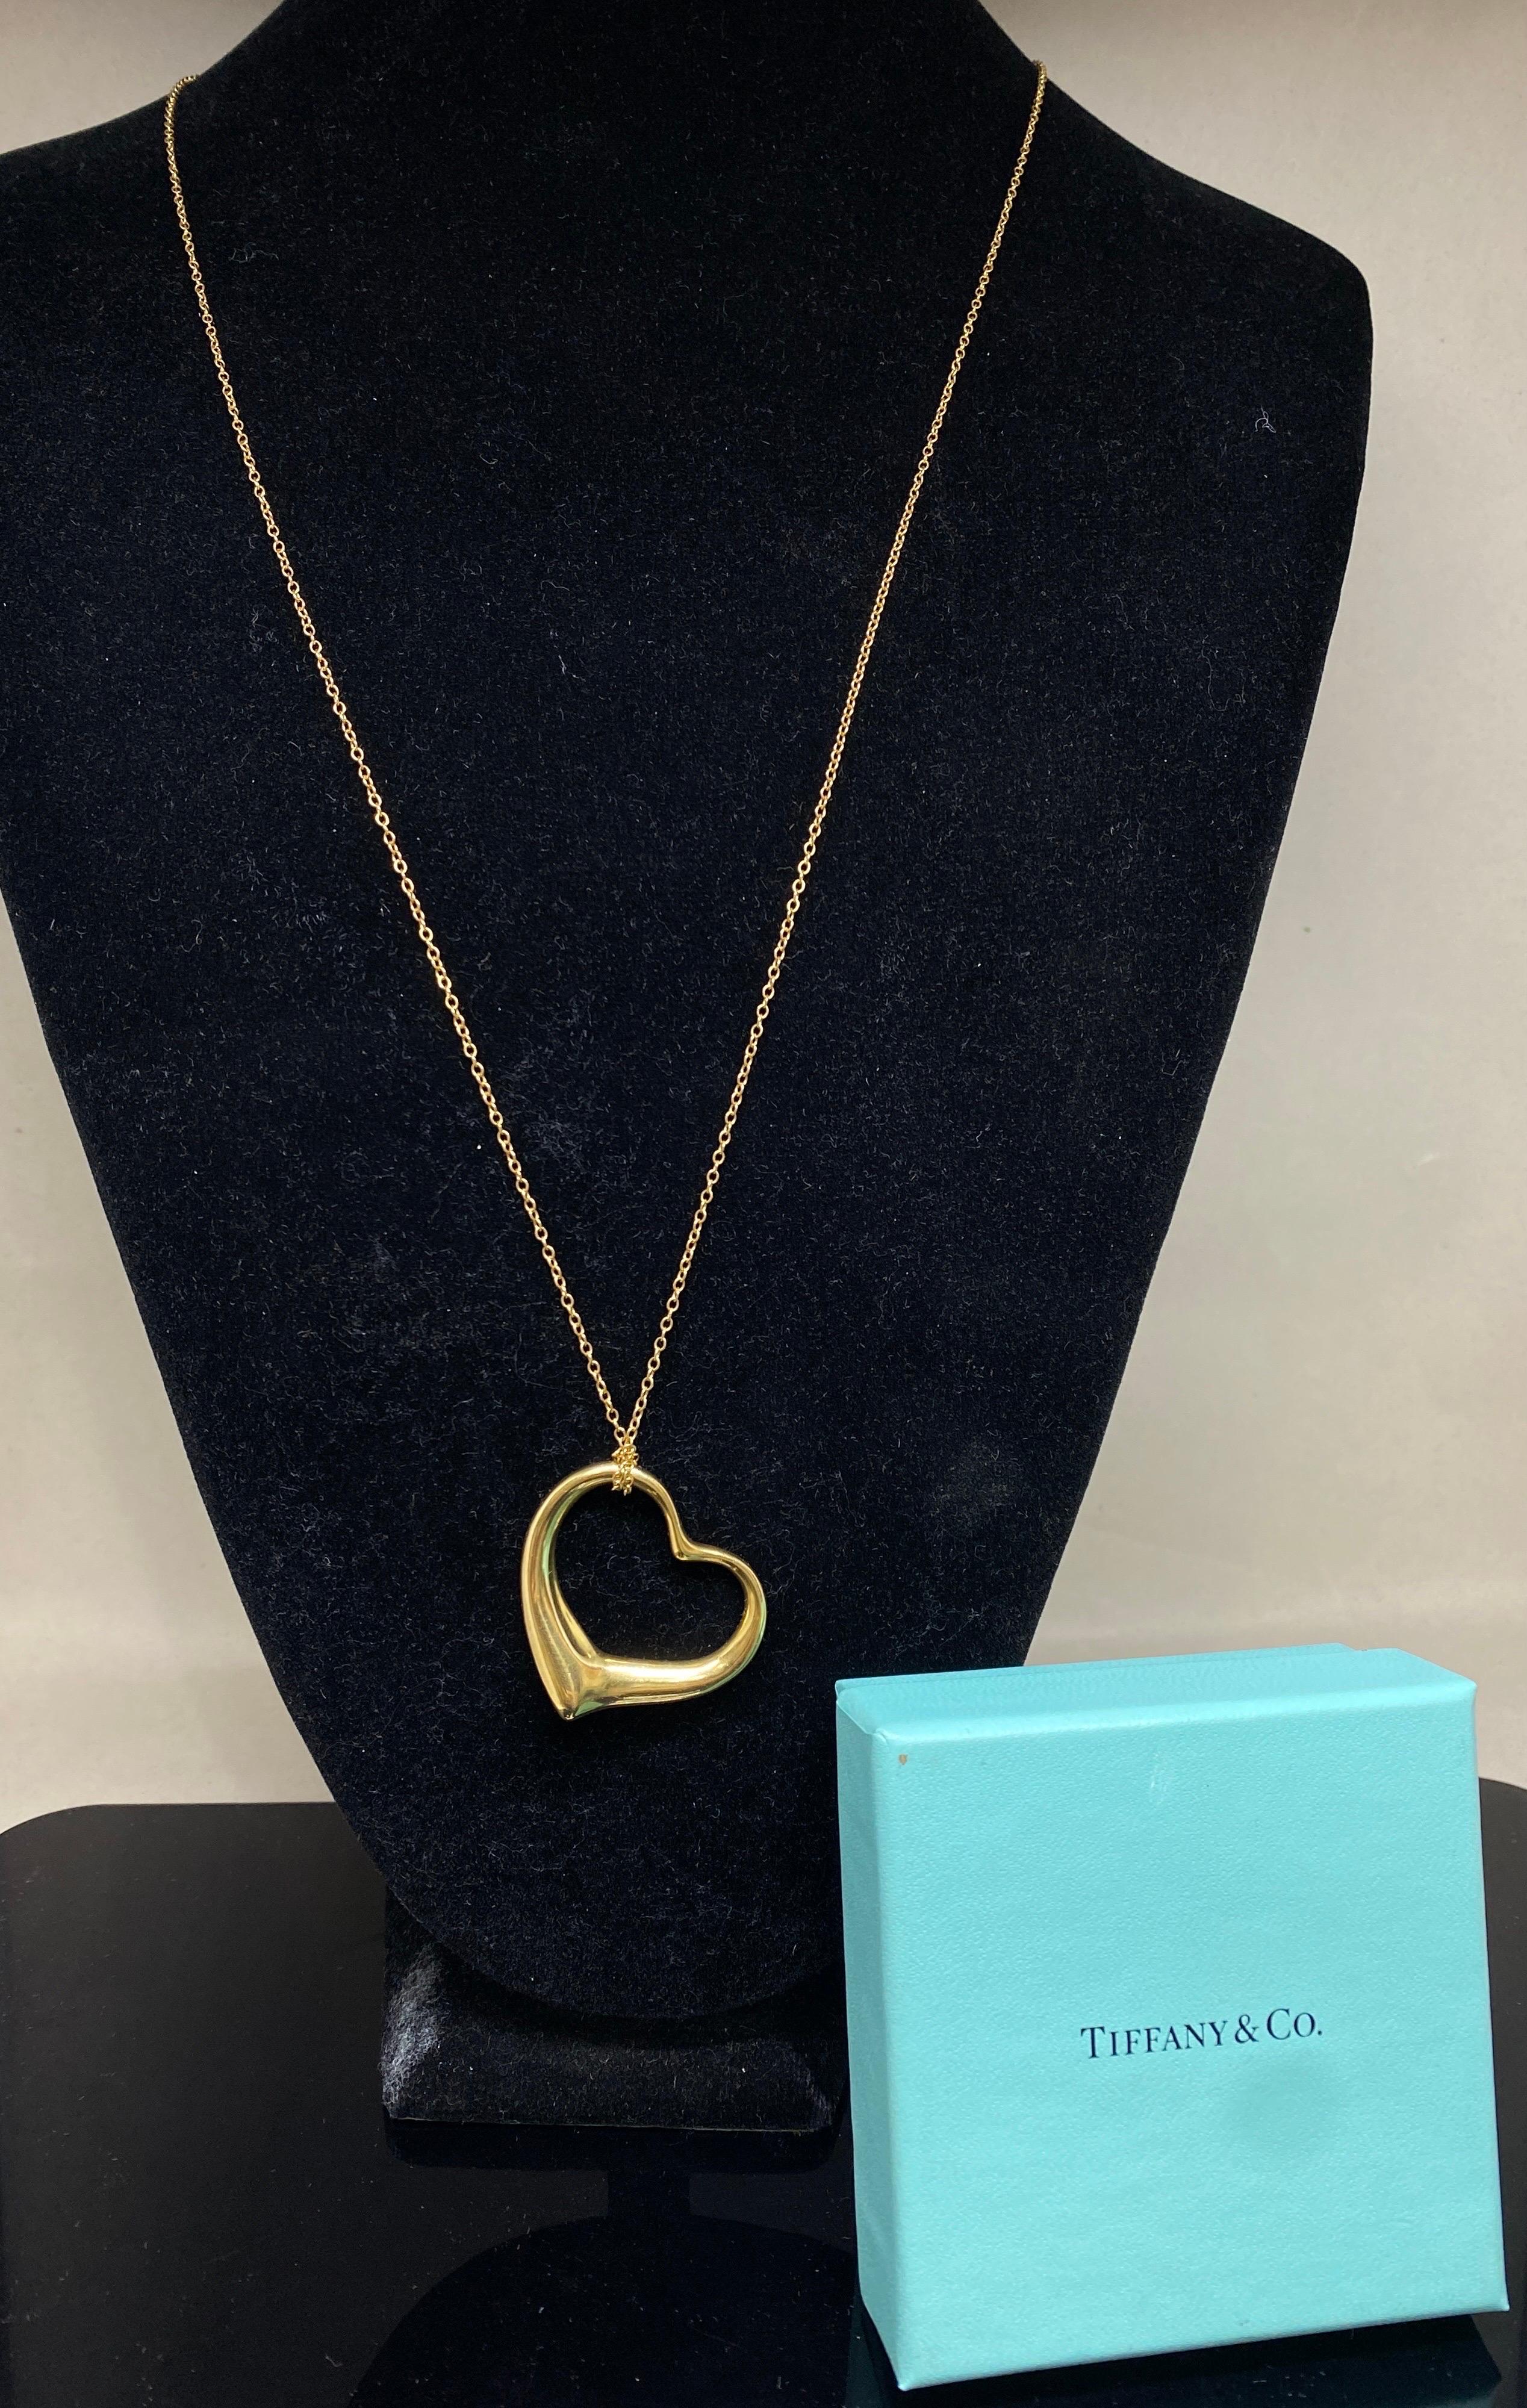 Women's 18k Yellow Gold Tiffany & Co EXTRA Large Elsa Peretti Open Hear Necklace Pendant For Sale